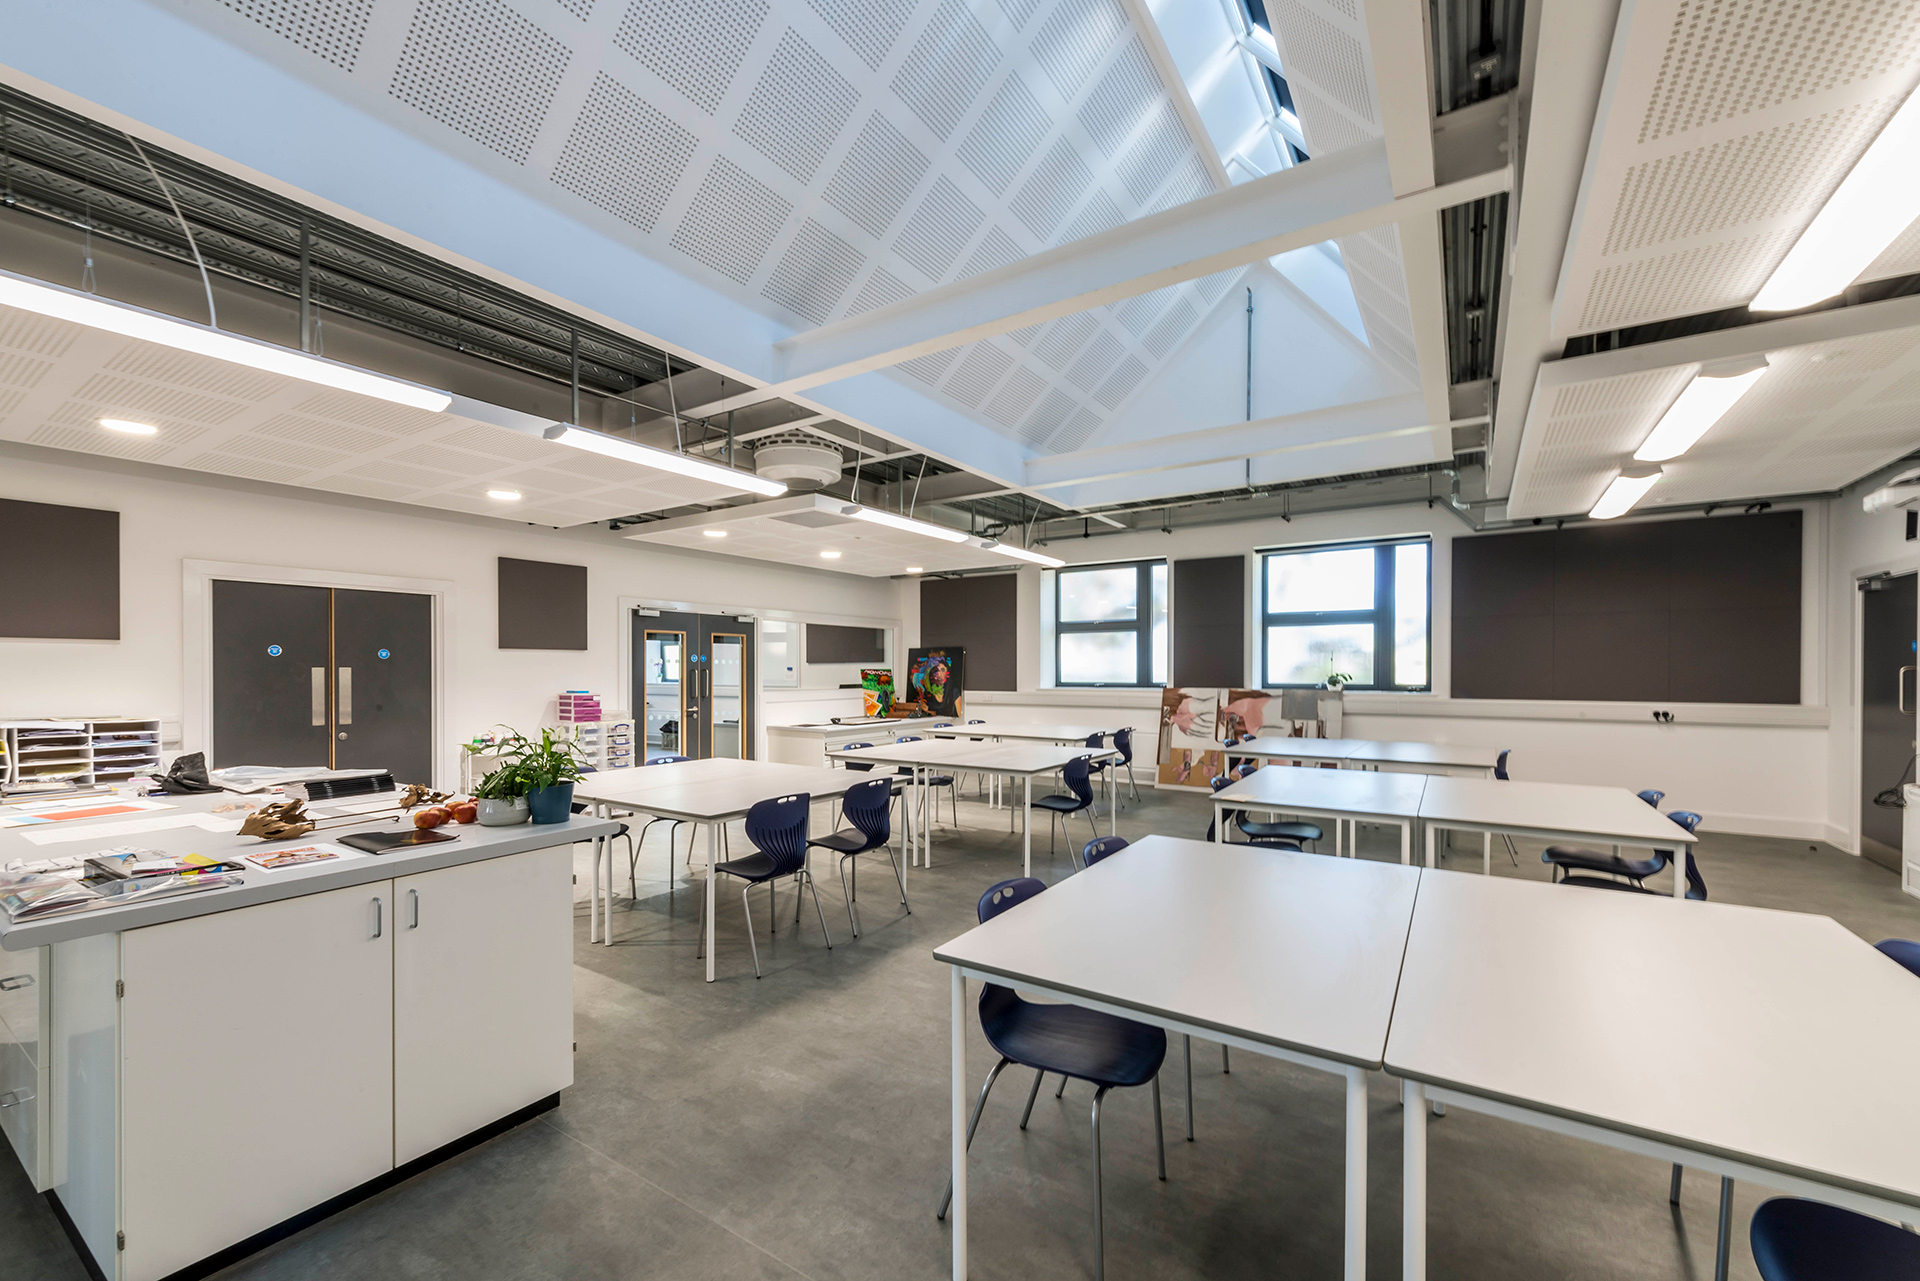 The Science of Classroom Design